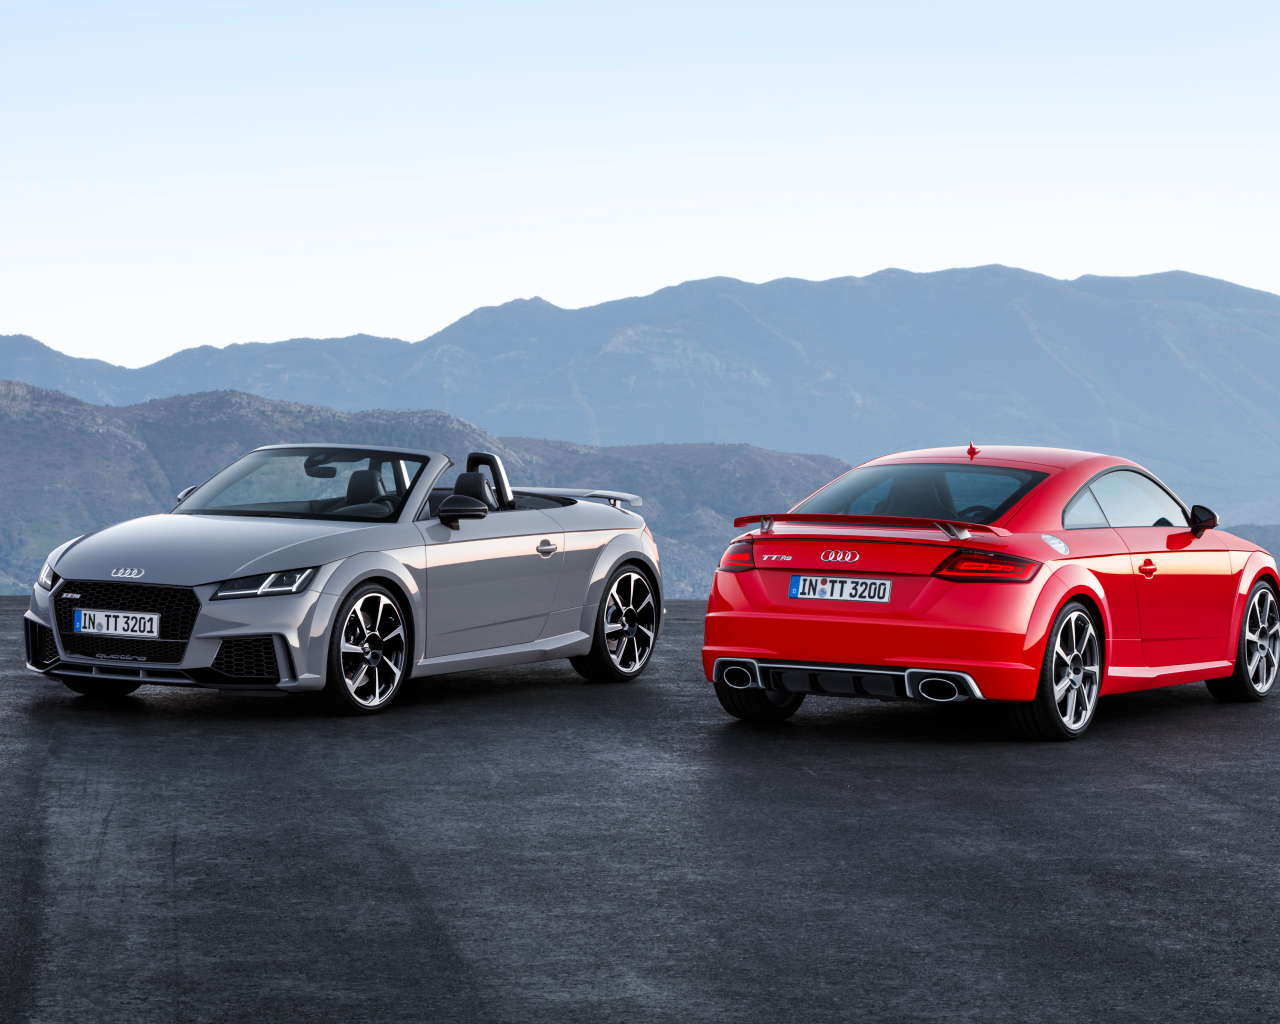 Two cars of silver Audi TT and red Audi Roadster